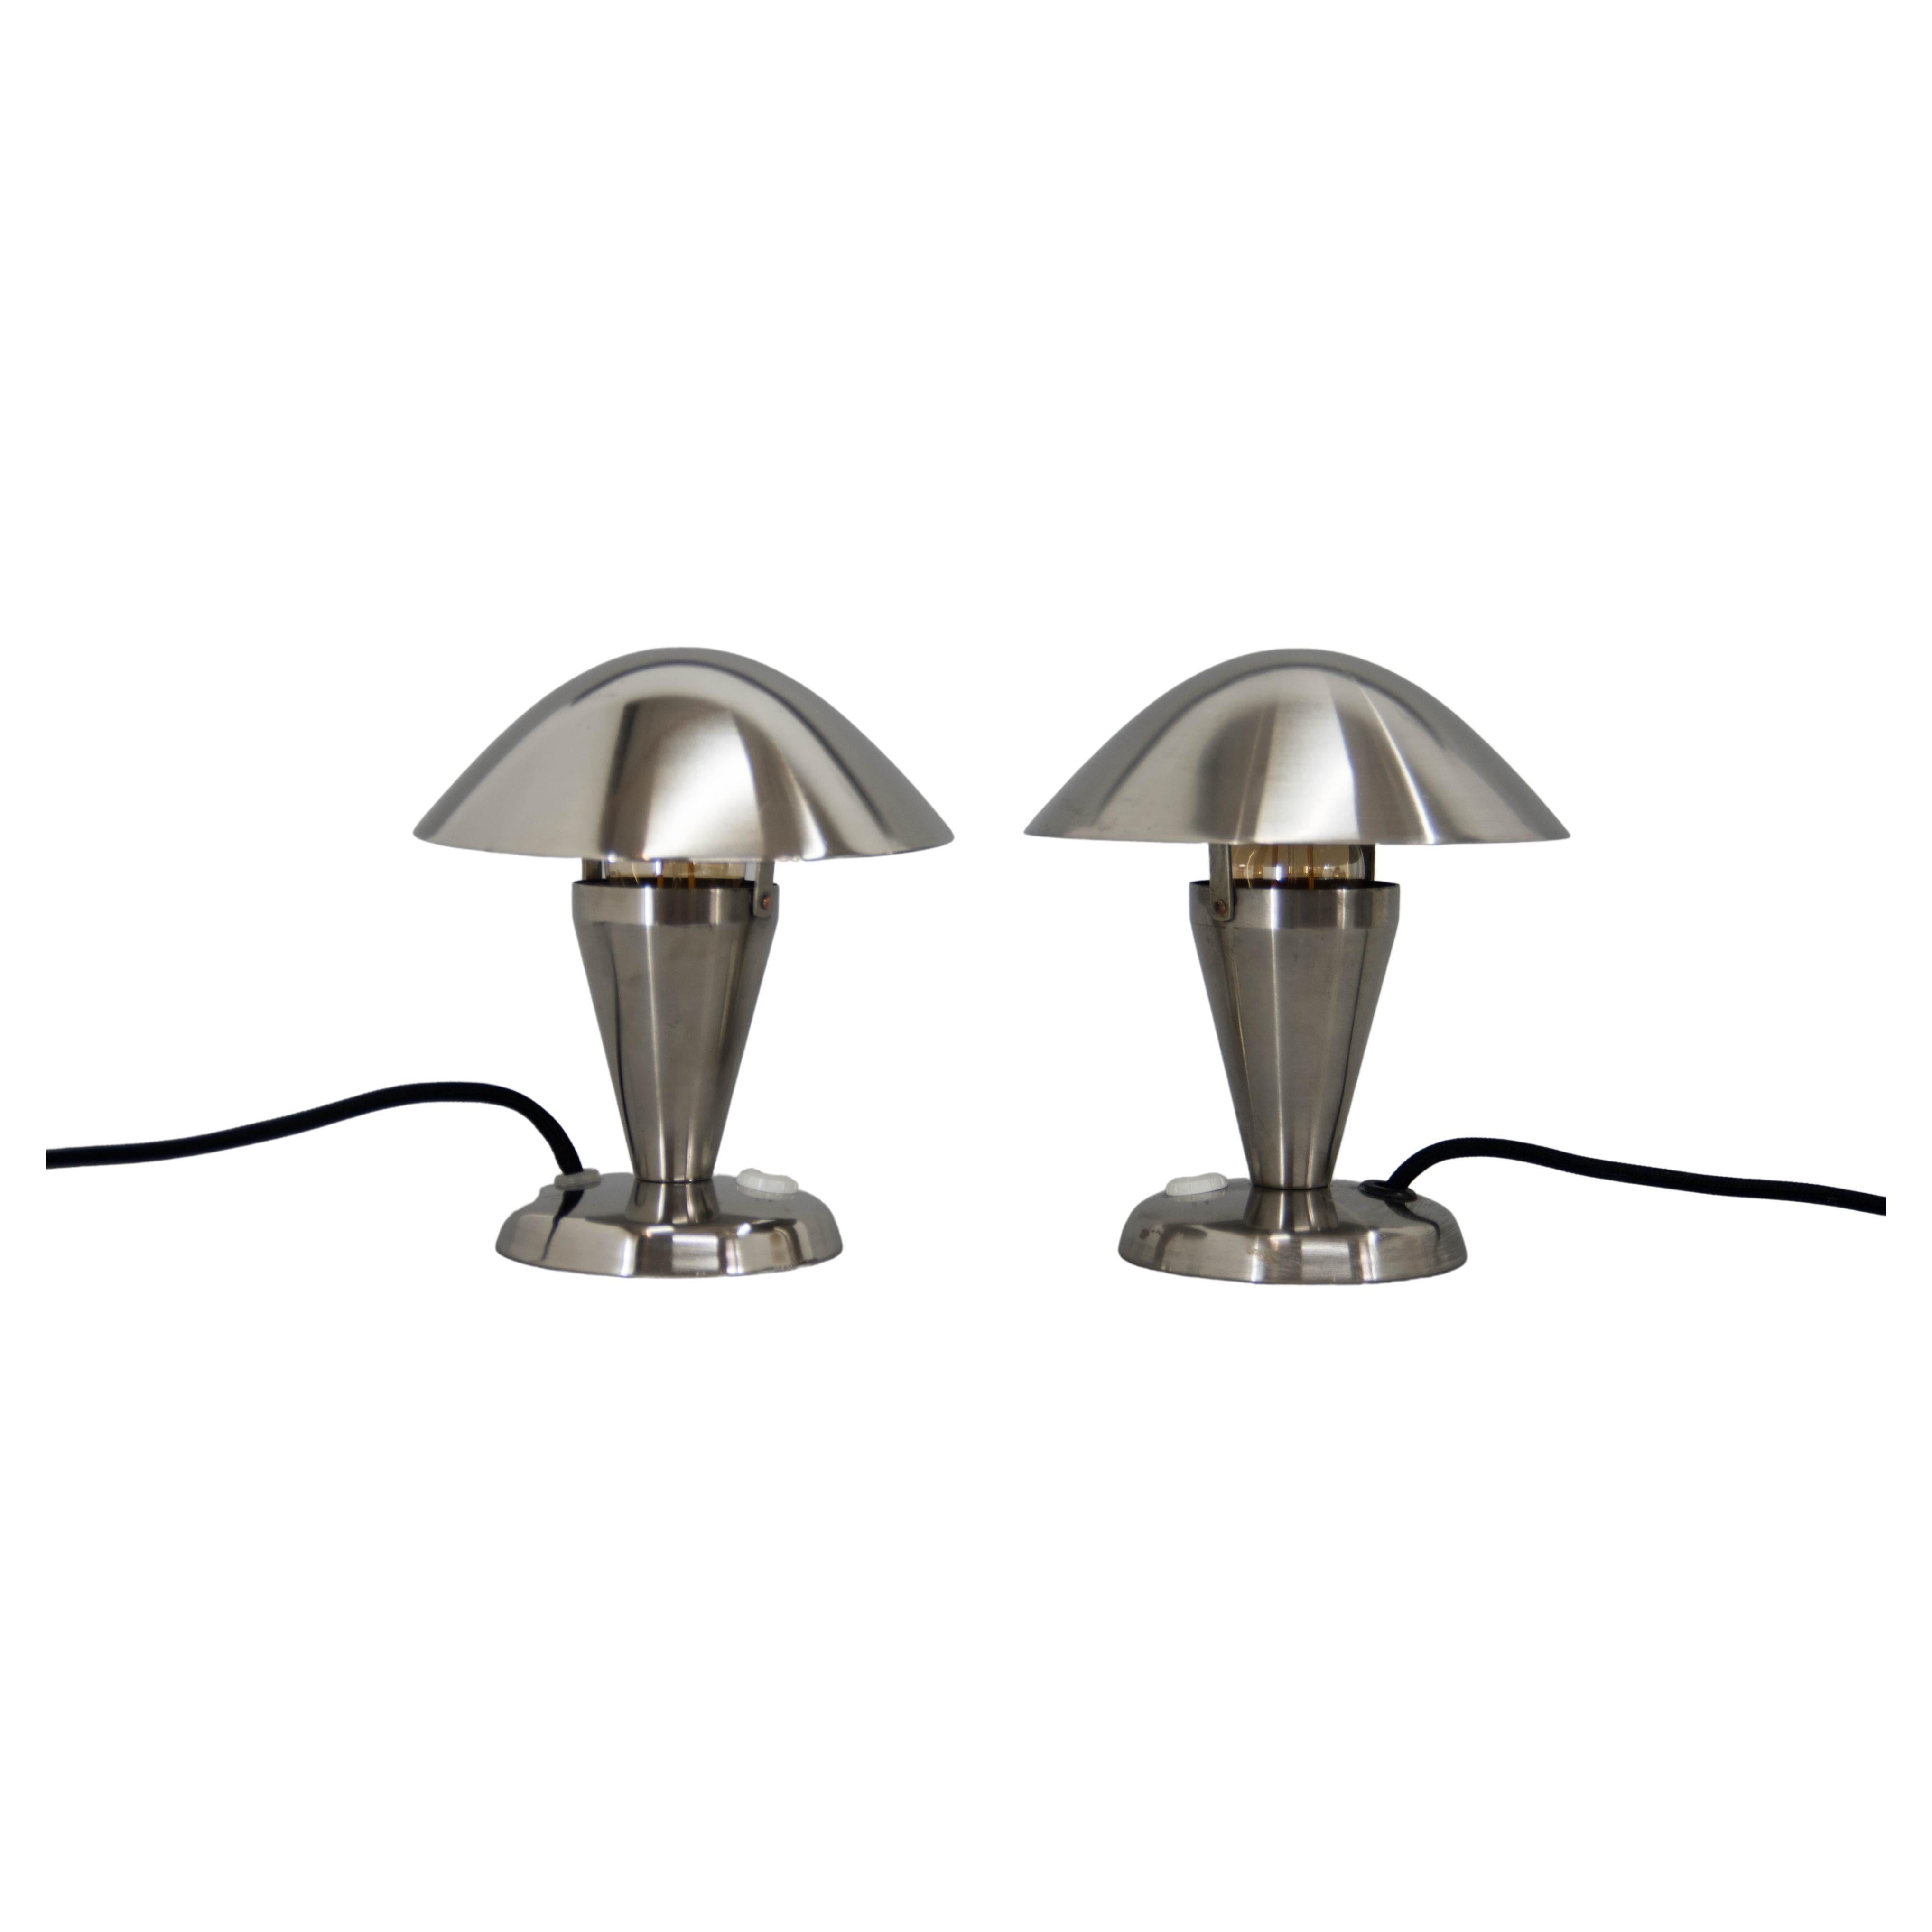 Set of Two Bauhaus Table Lamps, 1930s